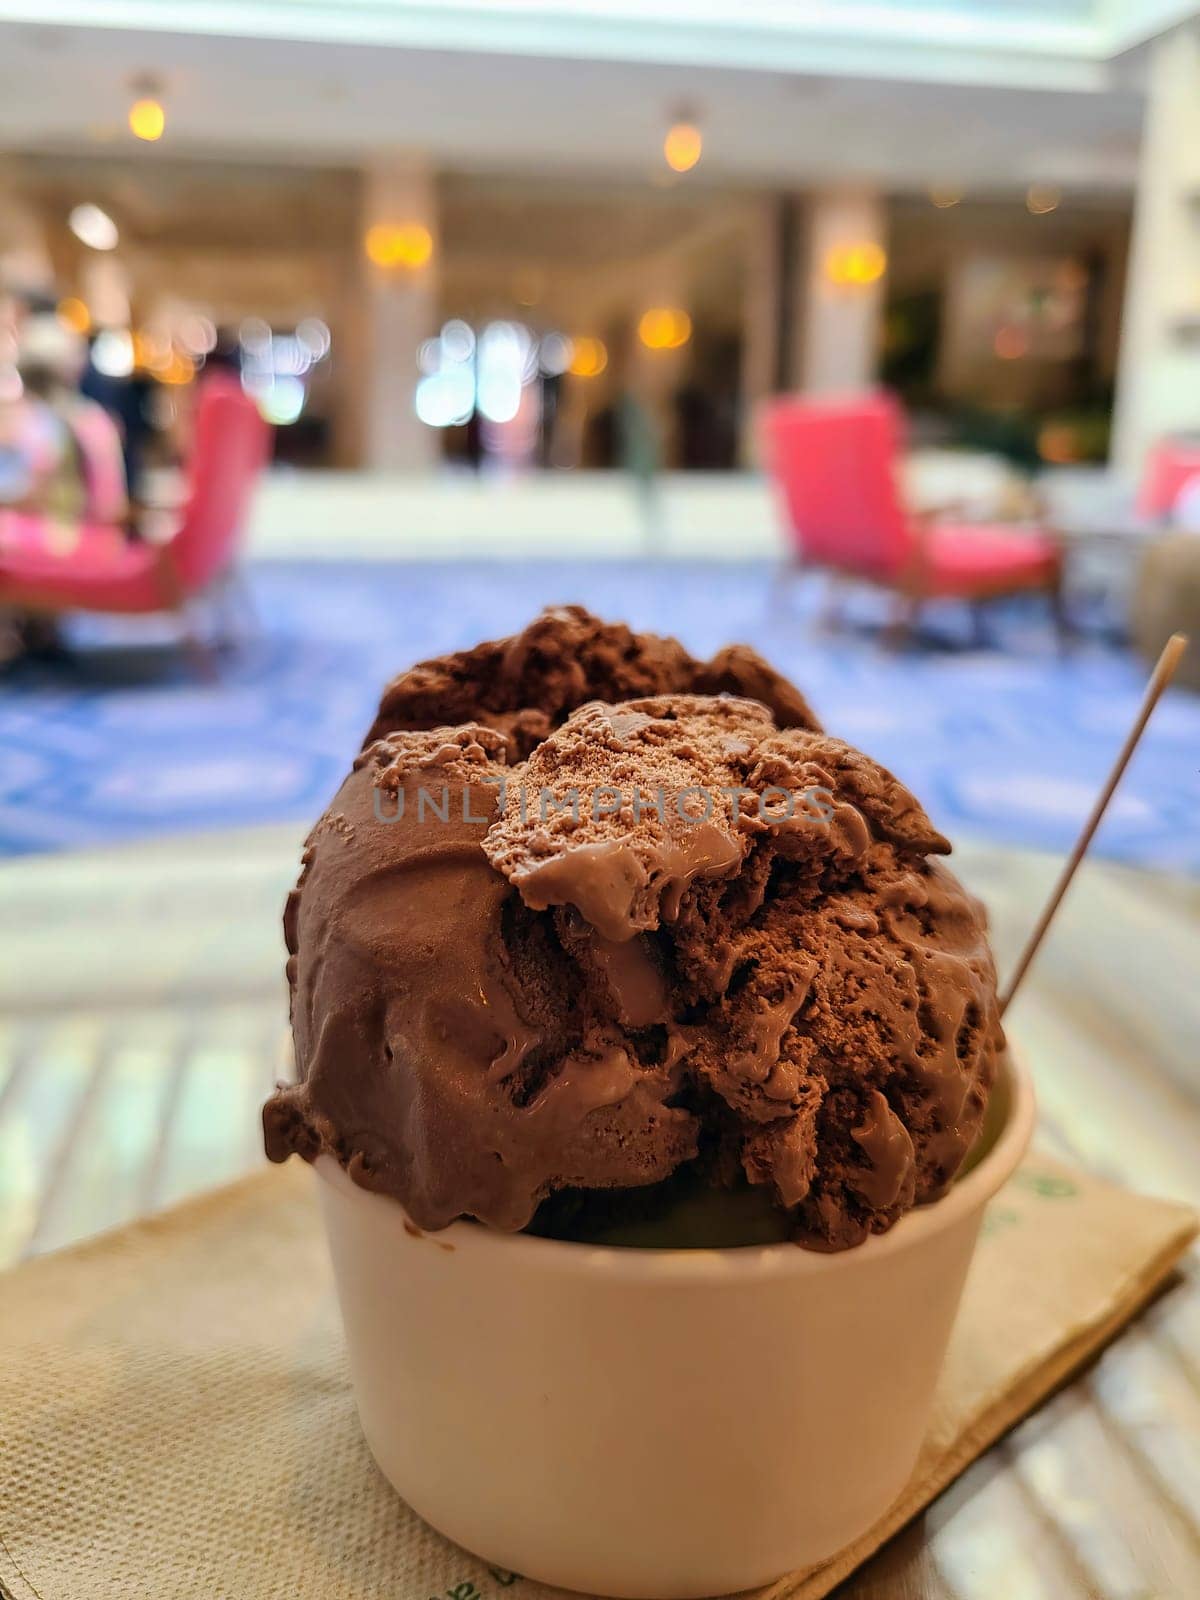 Close-up of rich and creamy chocolate ice cream in a white paper cup with wooden spoon, on a napkin, set in an elegant cafe in Nassau, Bahamas